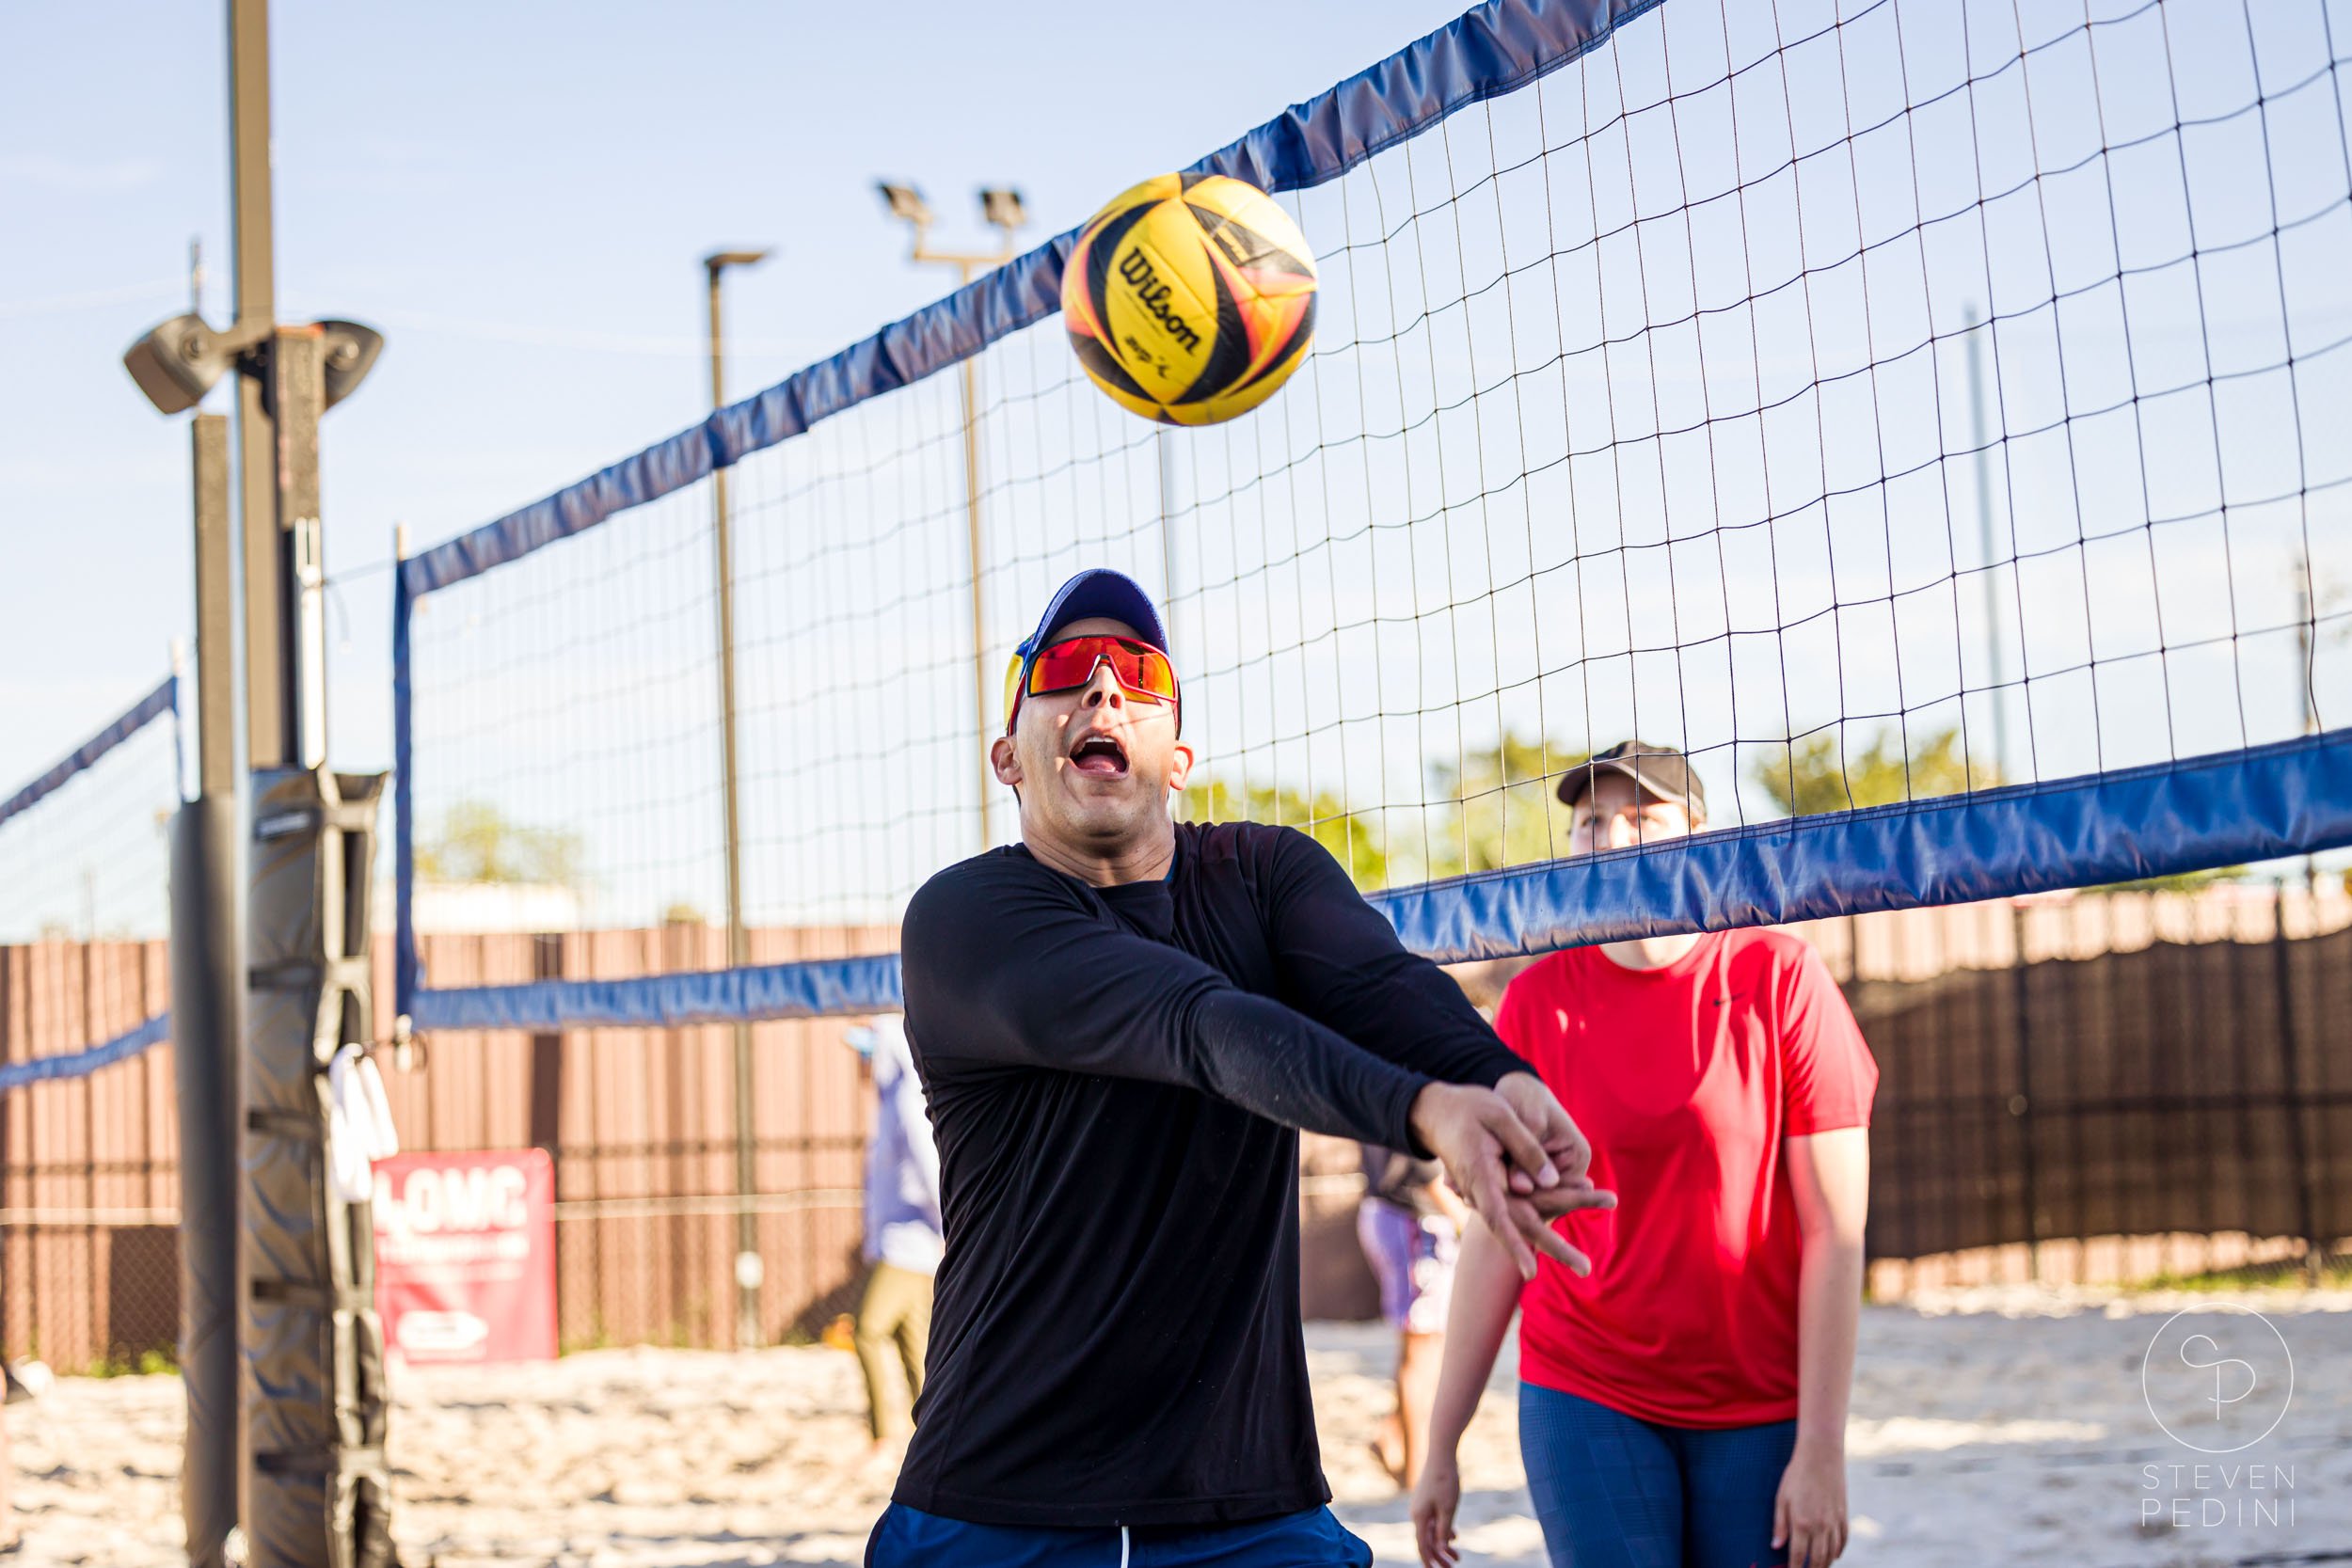 Steven Pedini Photography - Bumpy Pickle - Sand Volleyball - Houston TX - World Cup of Volleyball - 00102.jpg